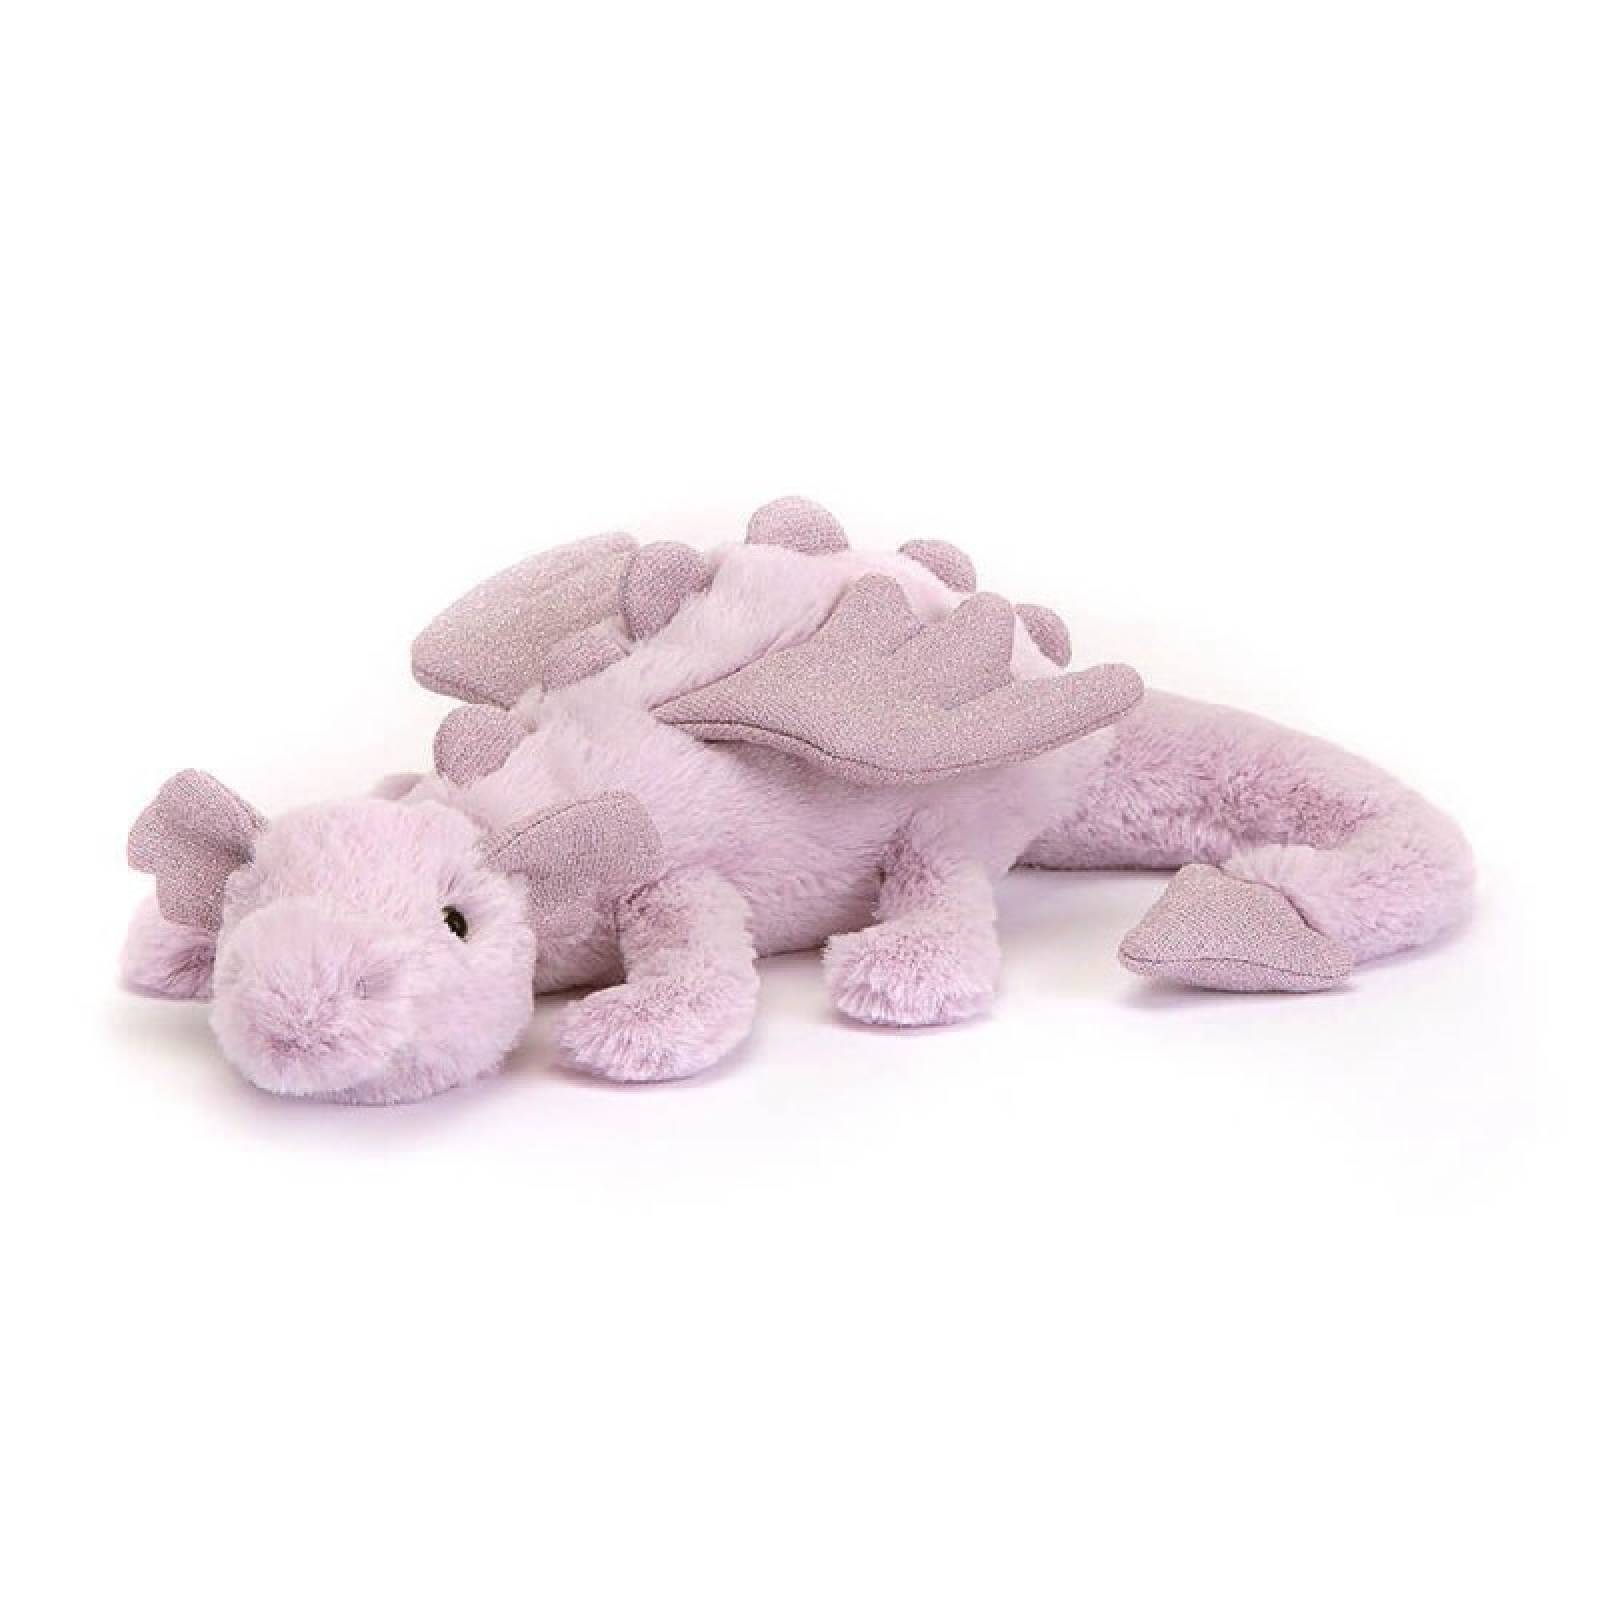 Little Lavender Dragon Soft Toy By Jellycat 0+